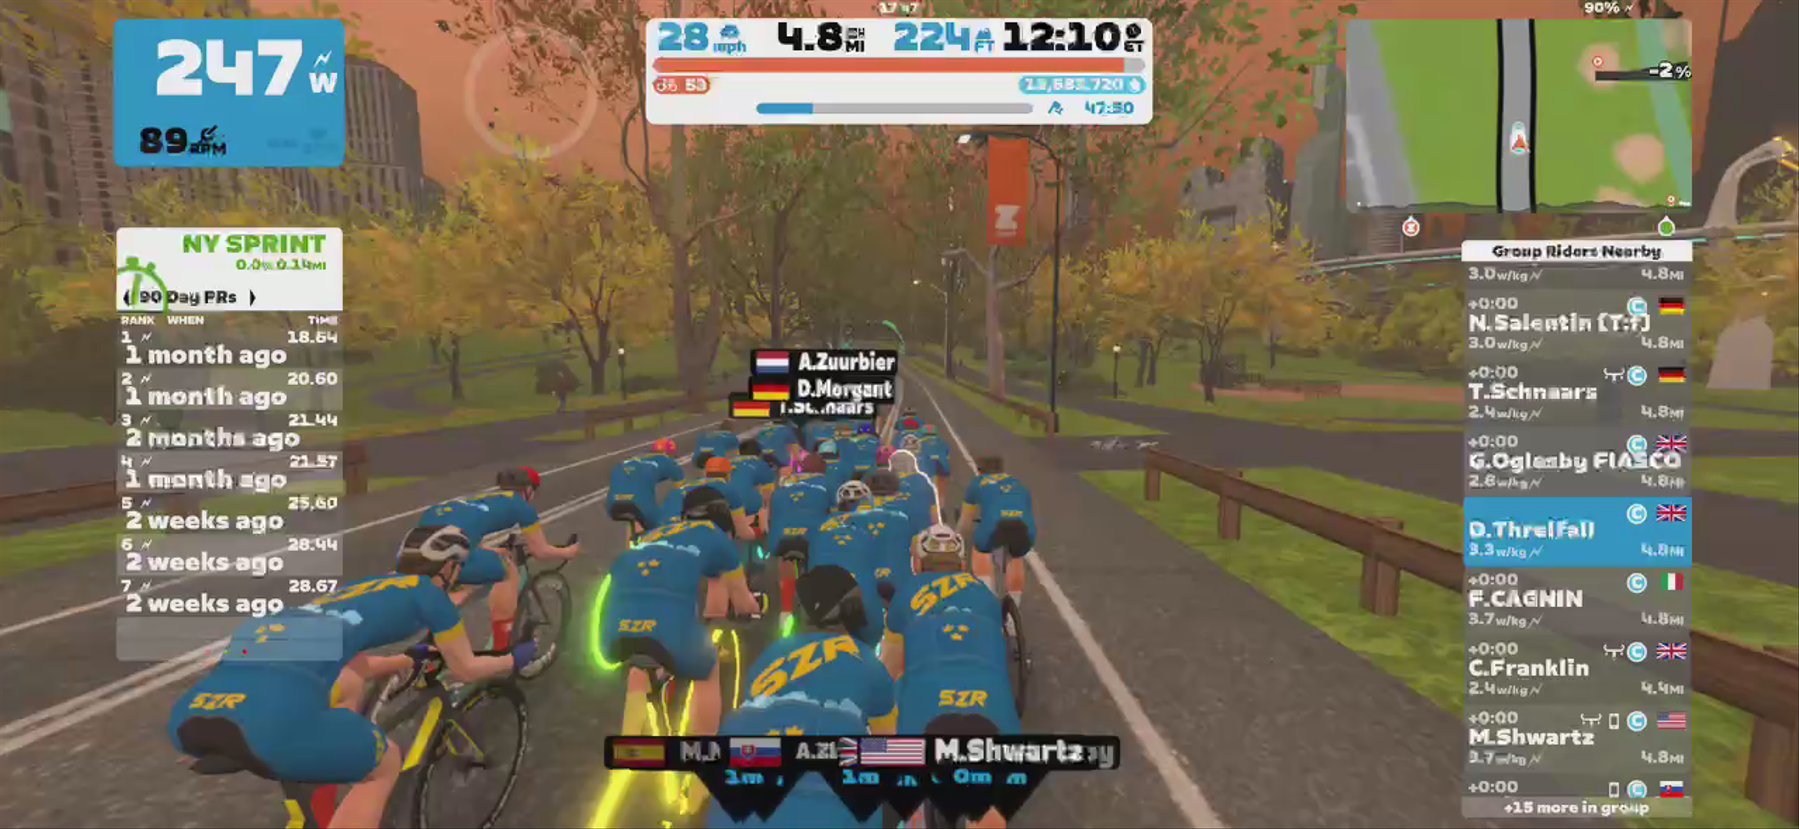 Zwift - Group Ride: SZR Funride (C) on NYC KOM After Party in New York